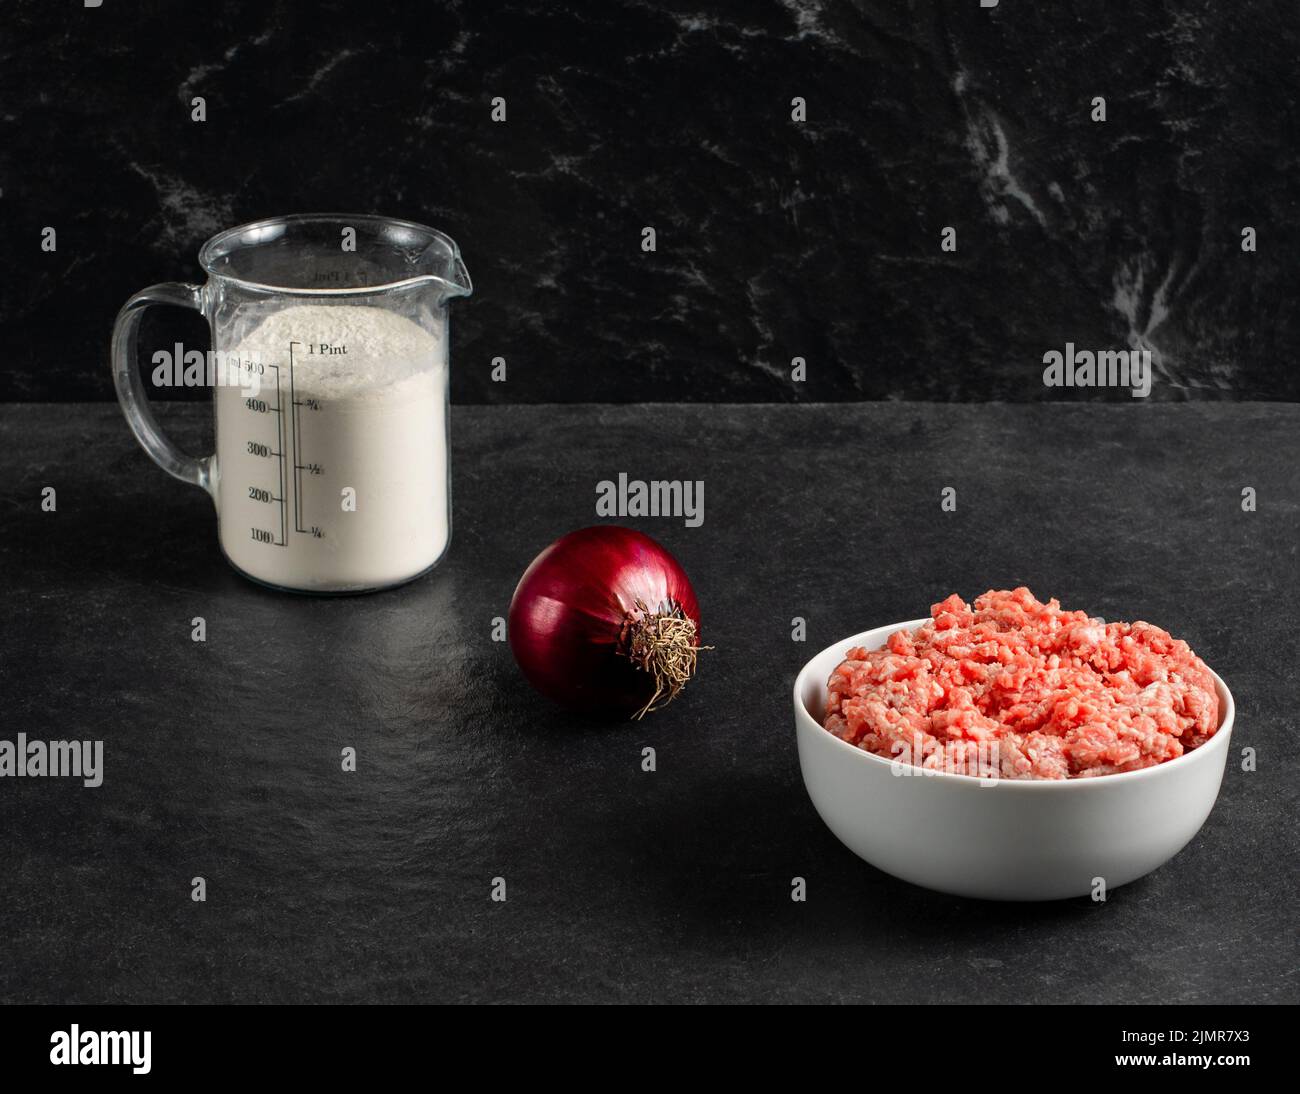 Plate with fresh ground beef, red onion, measuring cup with flour on a grey black background, space for text. Stock Photo